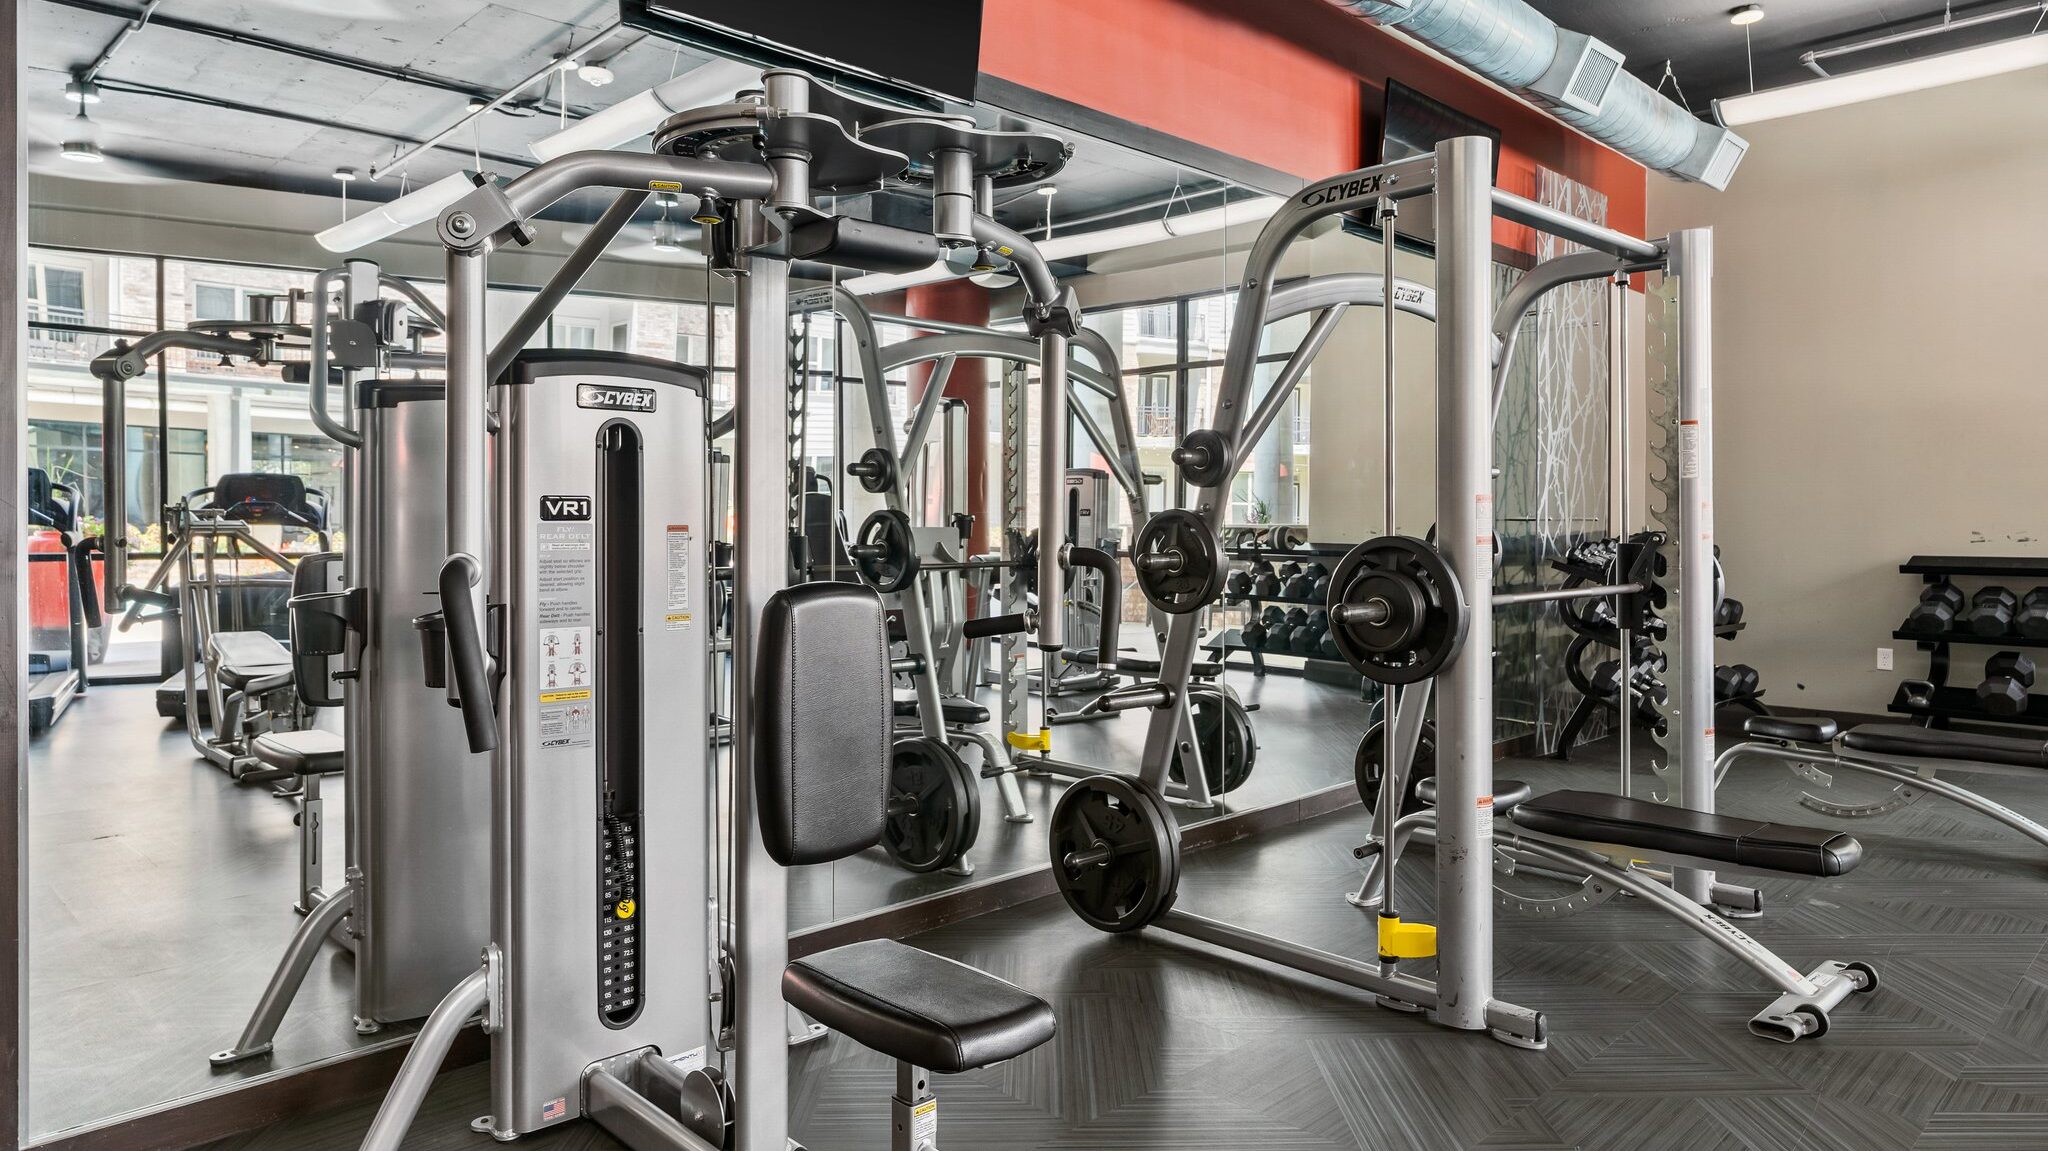 The strength conditioning equipment in the gym at Elan Med Center